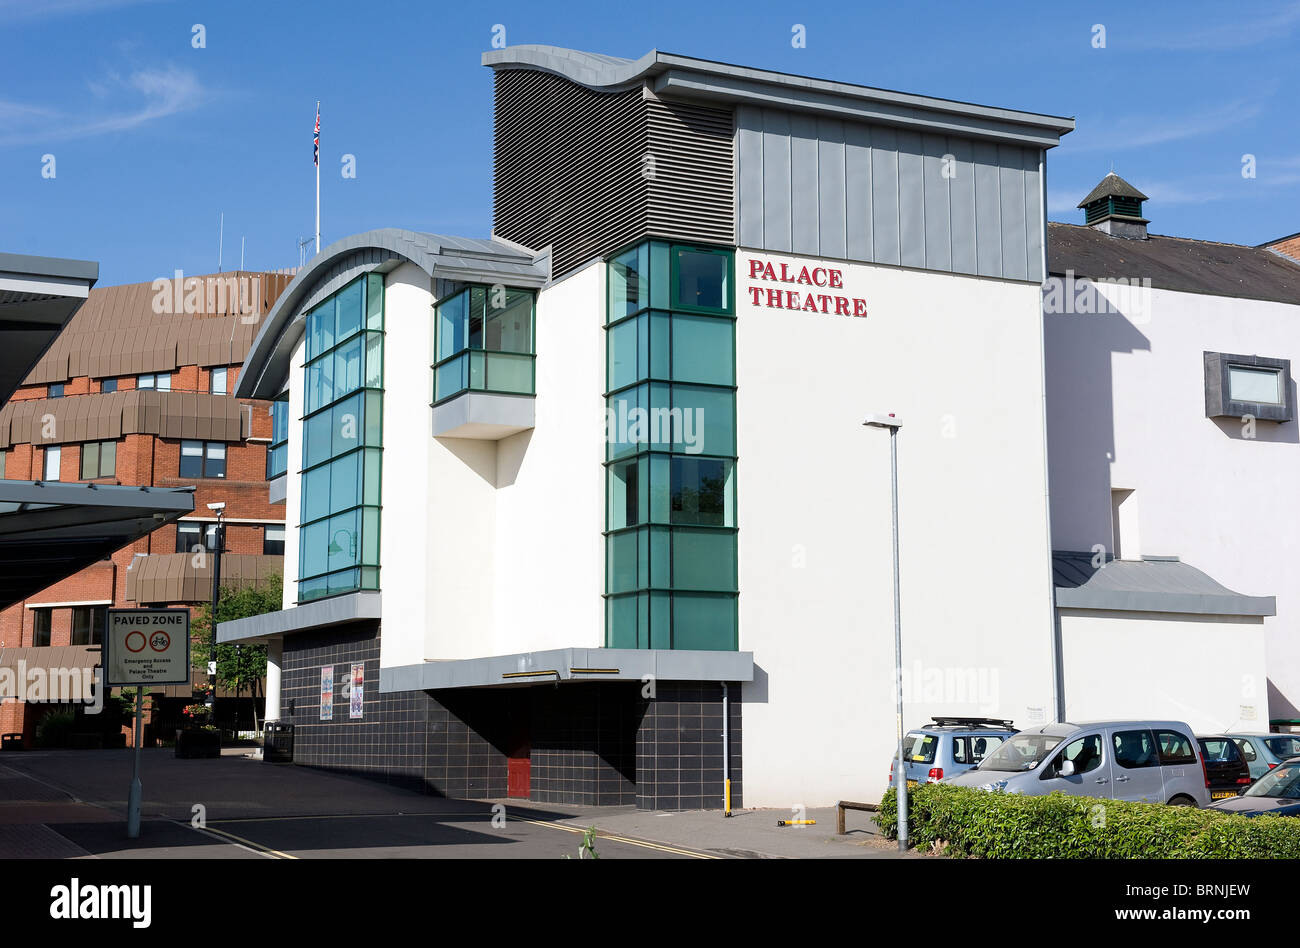 The Palace Theatre Redditch Worcestershire England UK Stock Photo